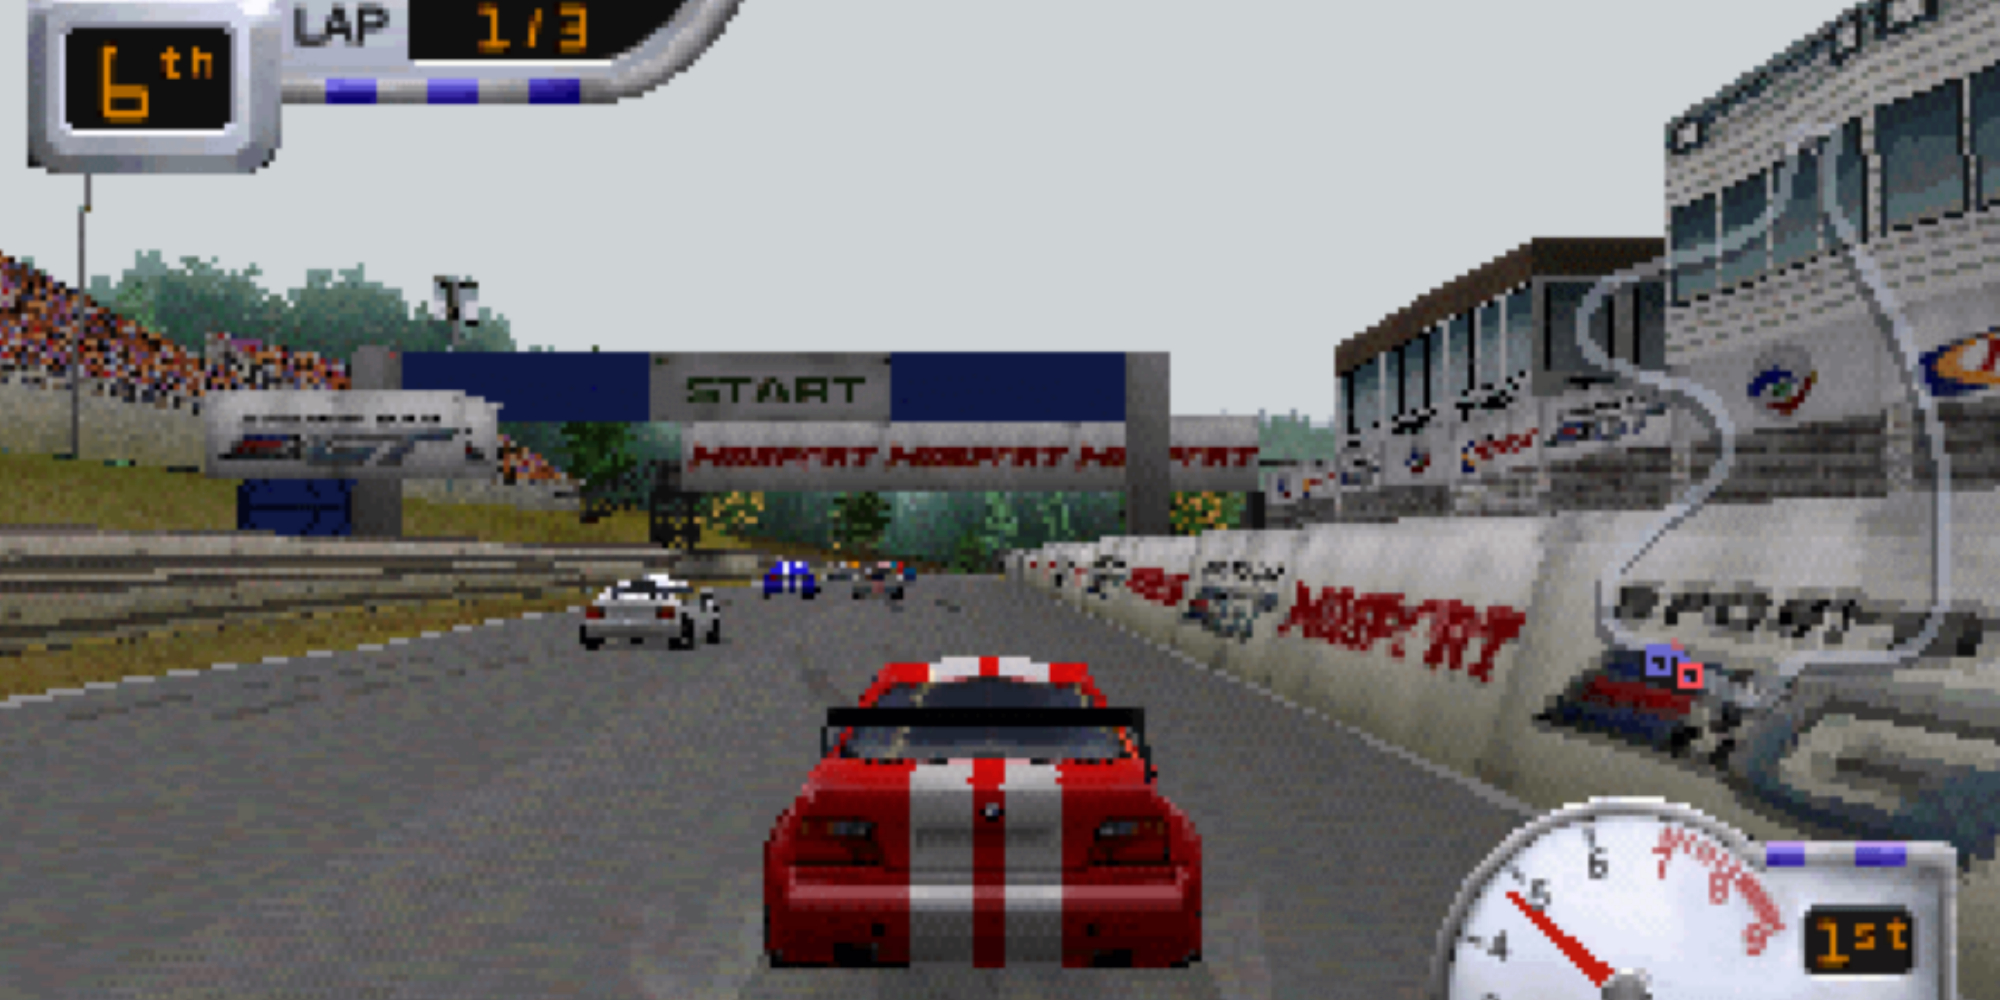 sports car gt ps1 showing a red and white striped car on a track